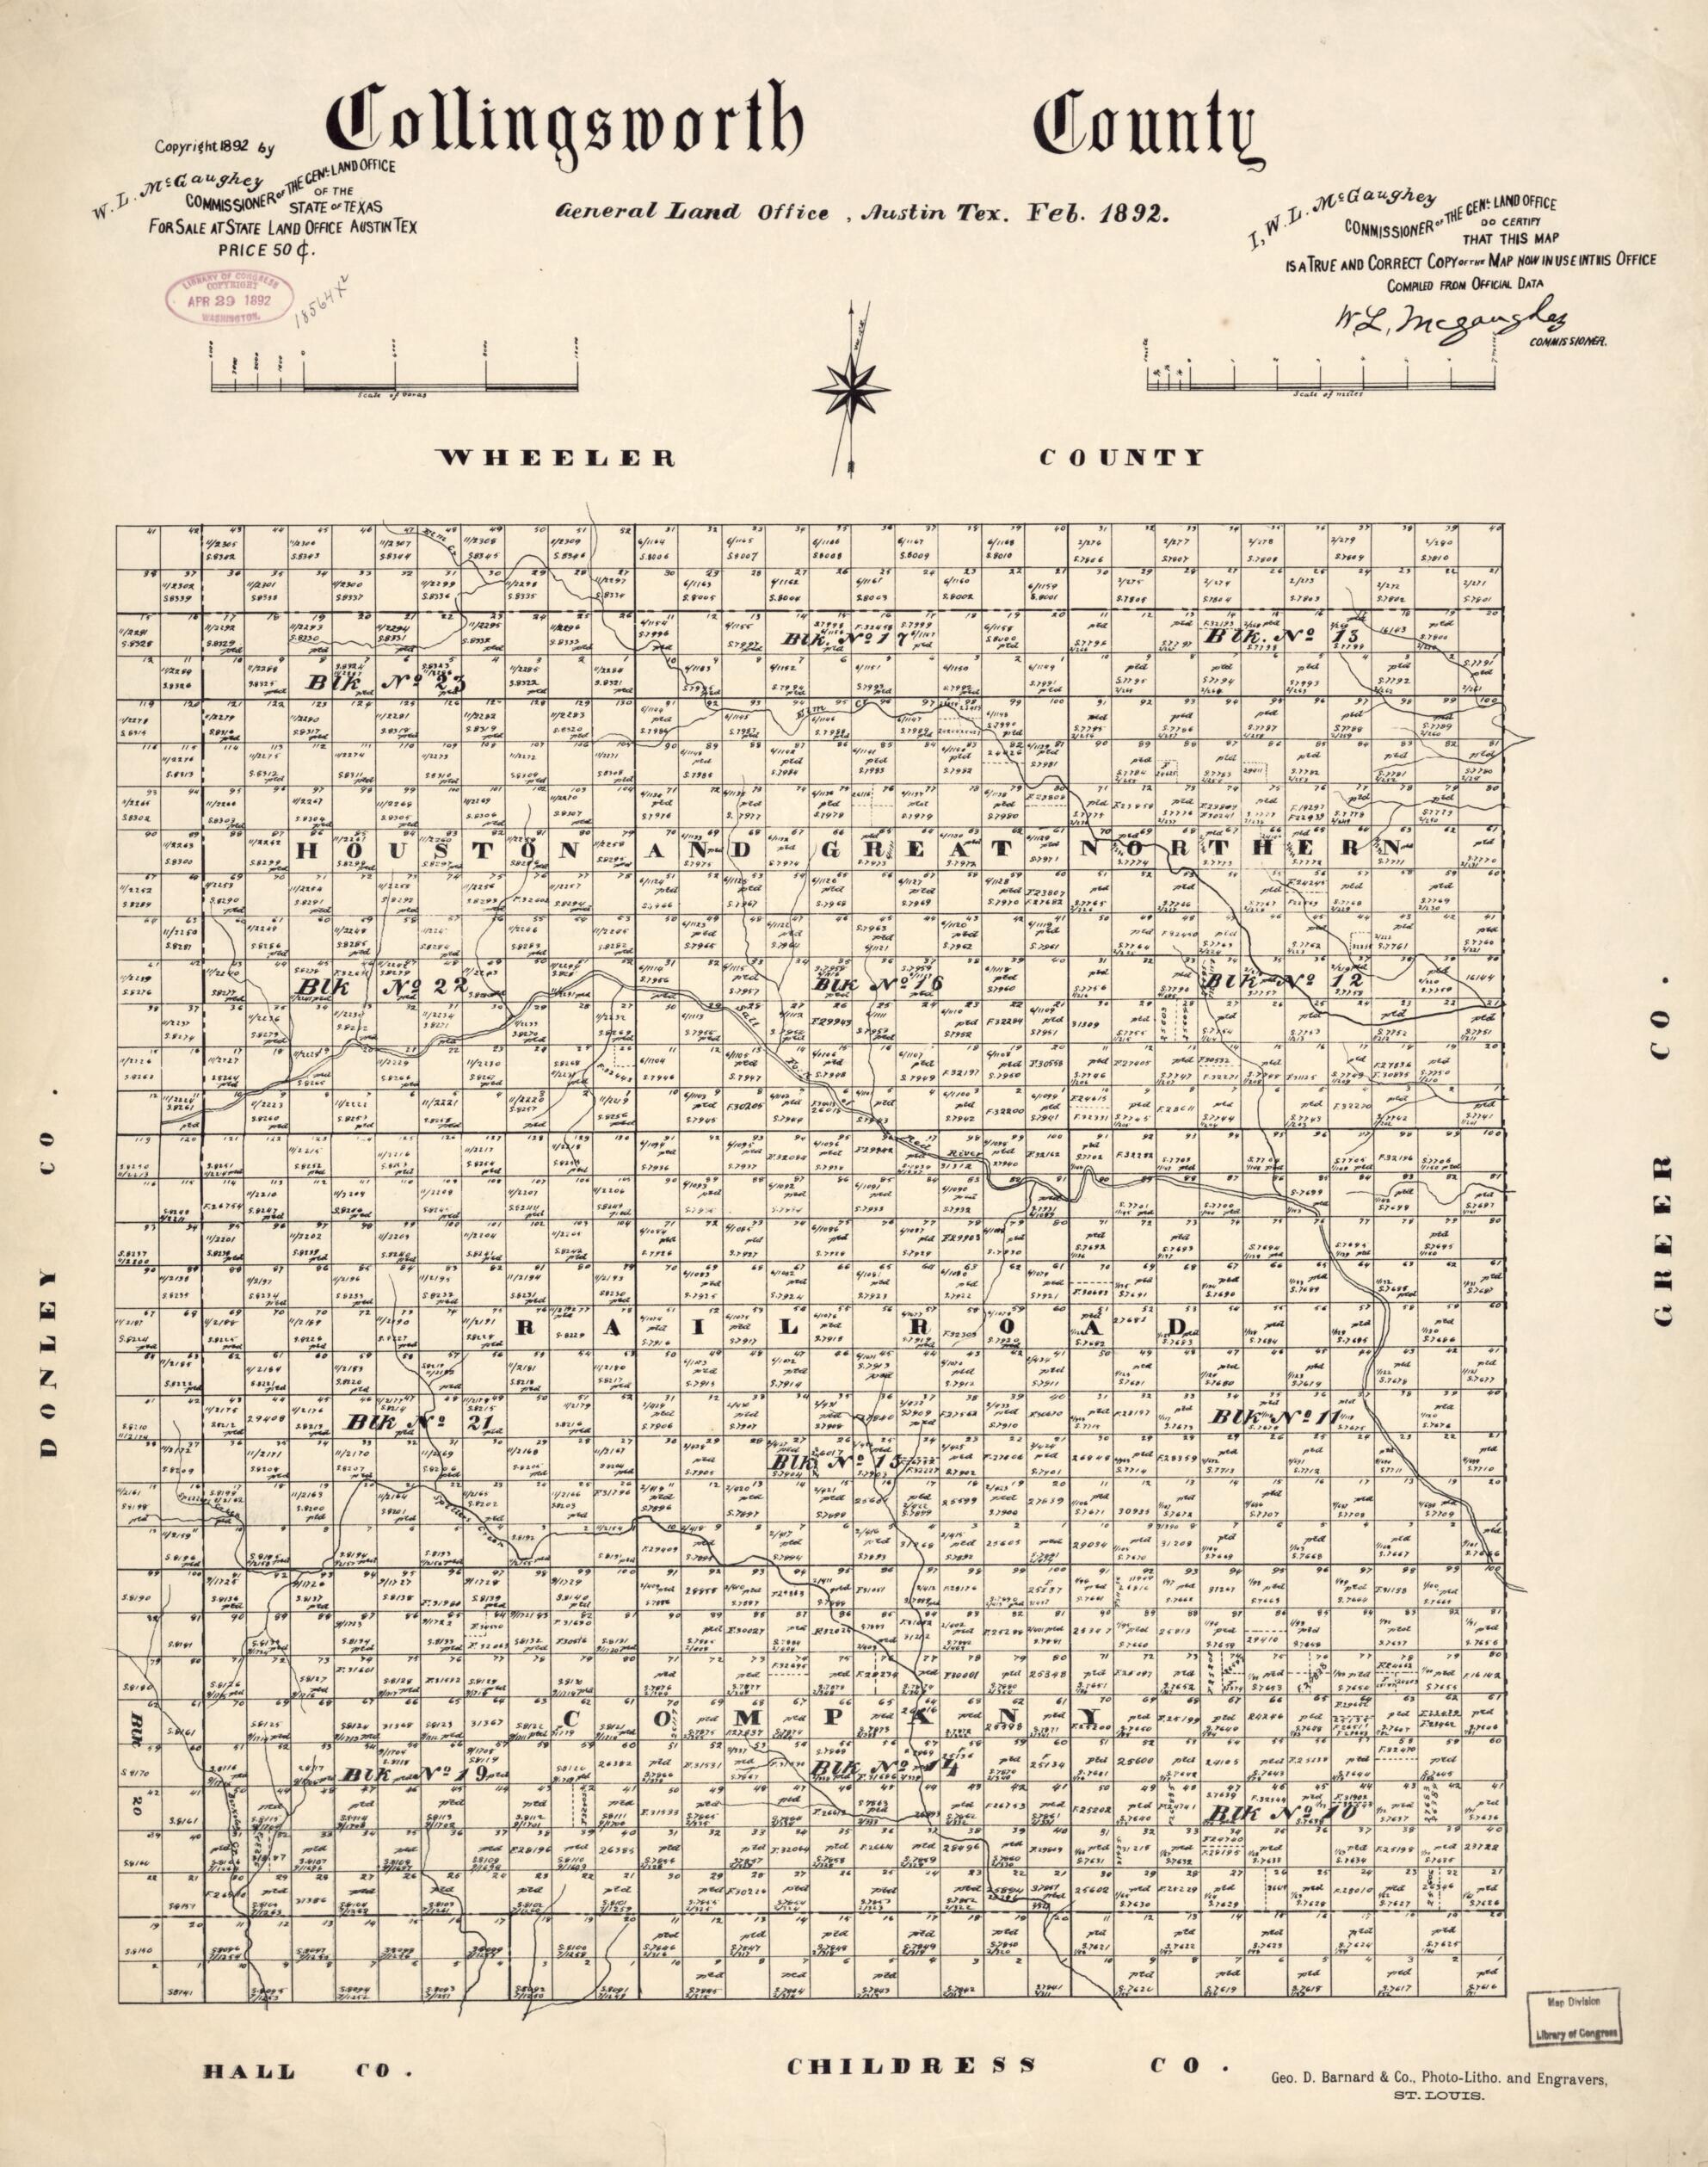 This old map of Collingsworth County from 1892 was created by W. L. McGaughey,  Texas. General Land Office in 1892